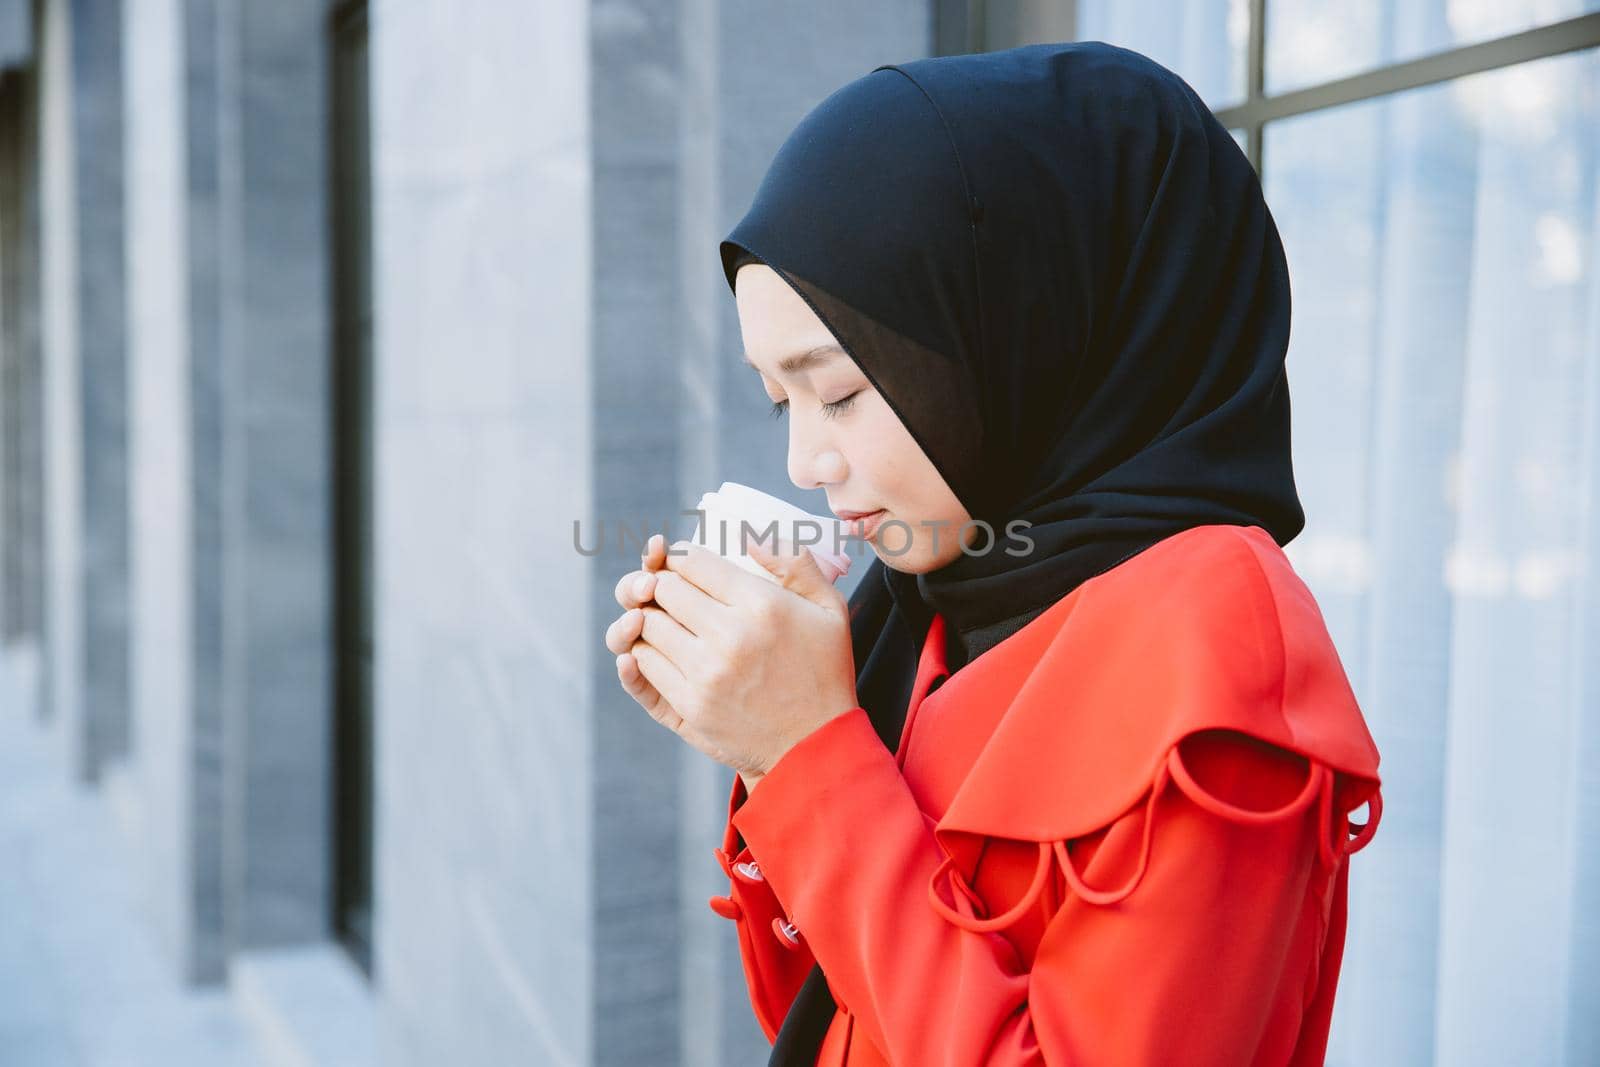 Arab Muslim women drinking coffee in the morning outdoor, Asian businesswoman young girl smiling hand hold coffee cup standing closeup.